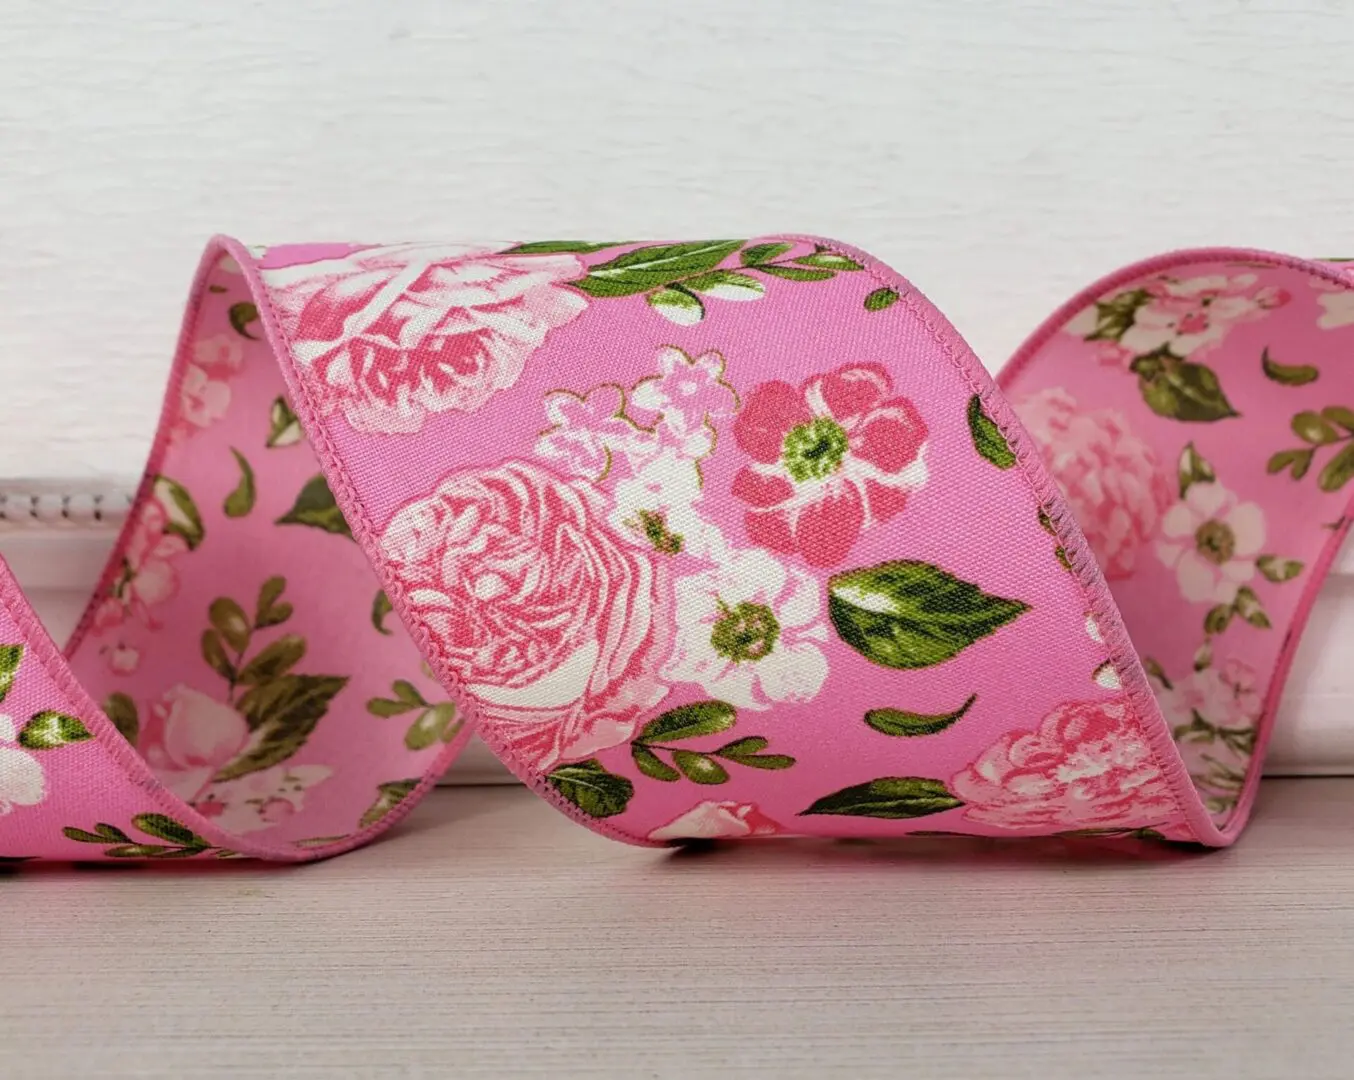 Pink roses and flowers with green leaves on pink 2.5Autumn leaves on ribbed satin with gold glitter 2.5" wide wired ribbon from the Etsy shop of Cottage Crafts Online.